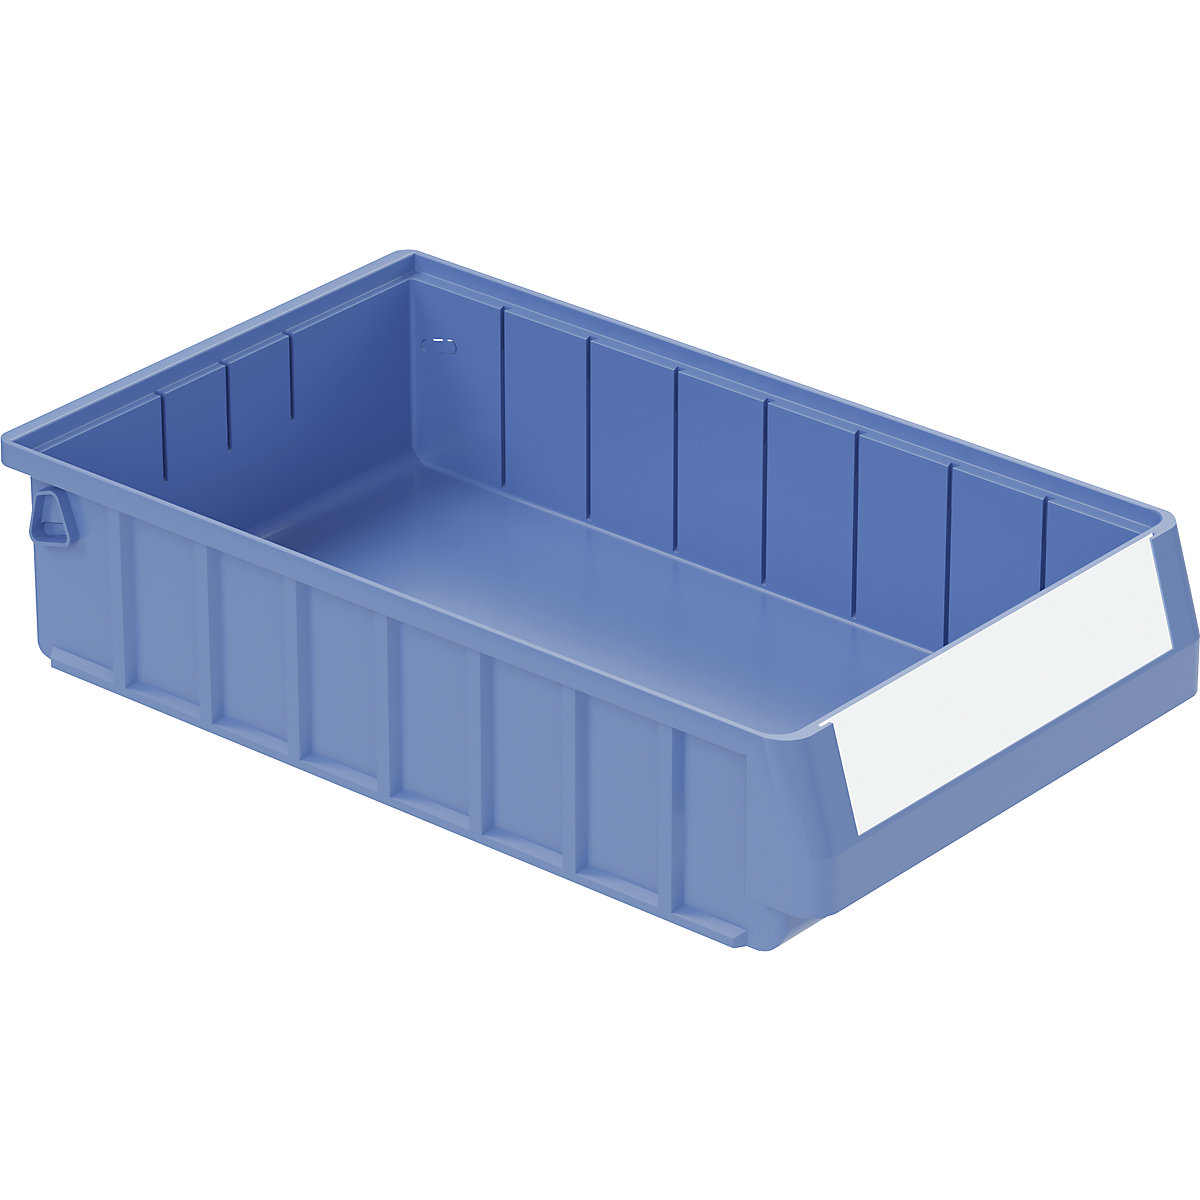 Shelf bin – BITO, made of PP, LxWxH 400 x 234 x 90 mm, pack of 8-10